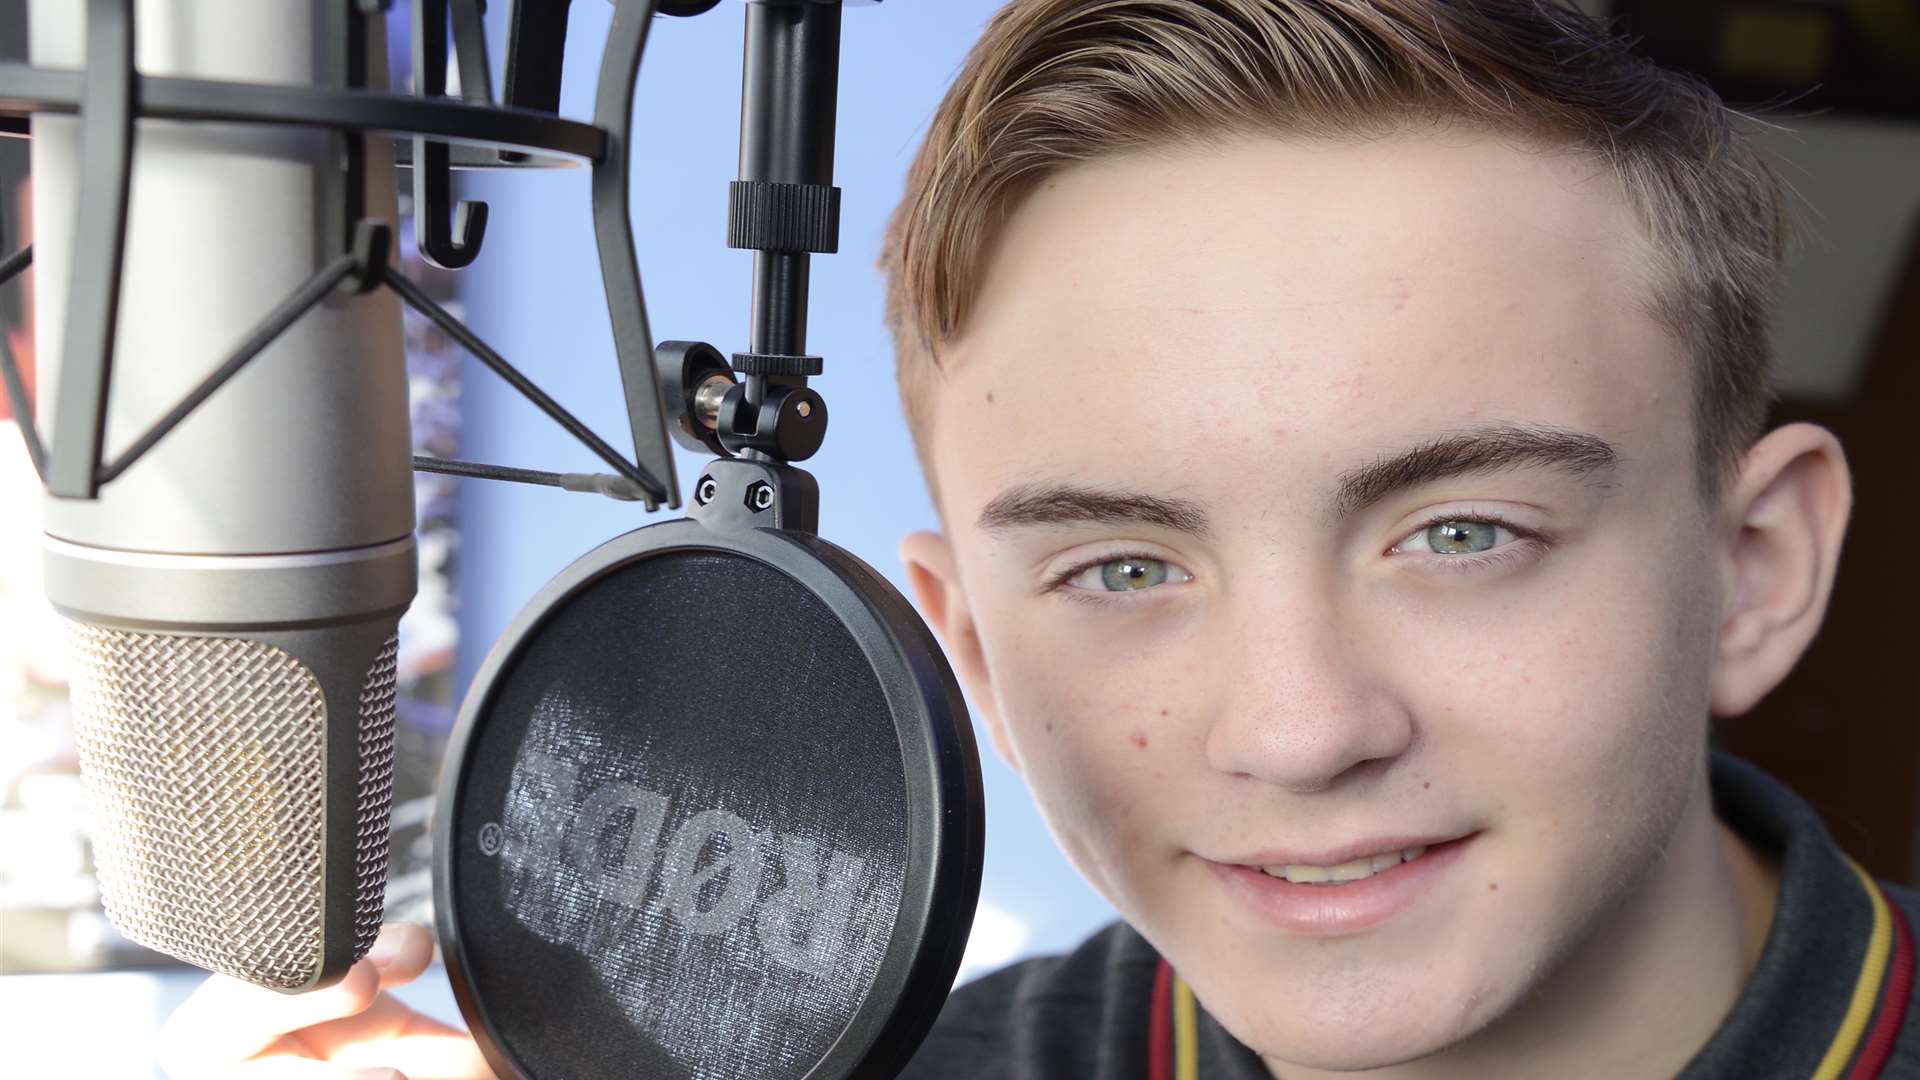 Jack Rose is hoping his single will be the road to singing fame